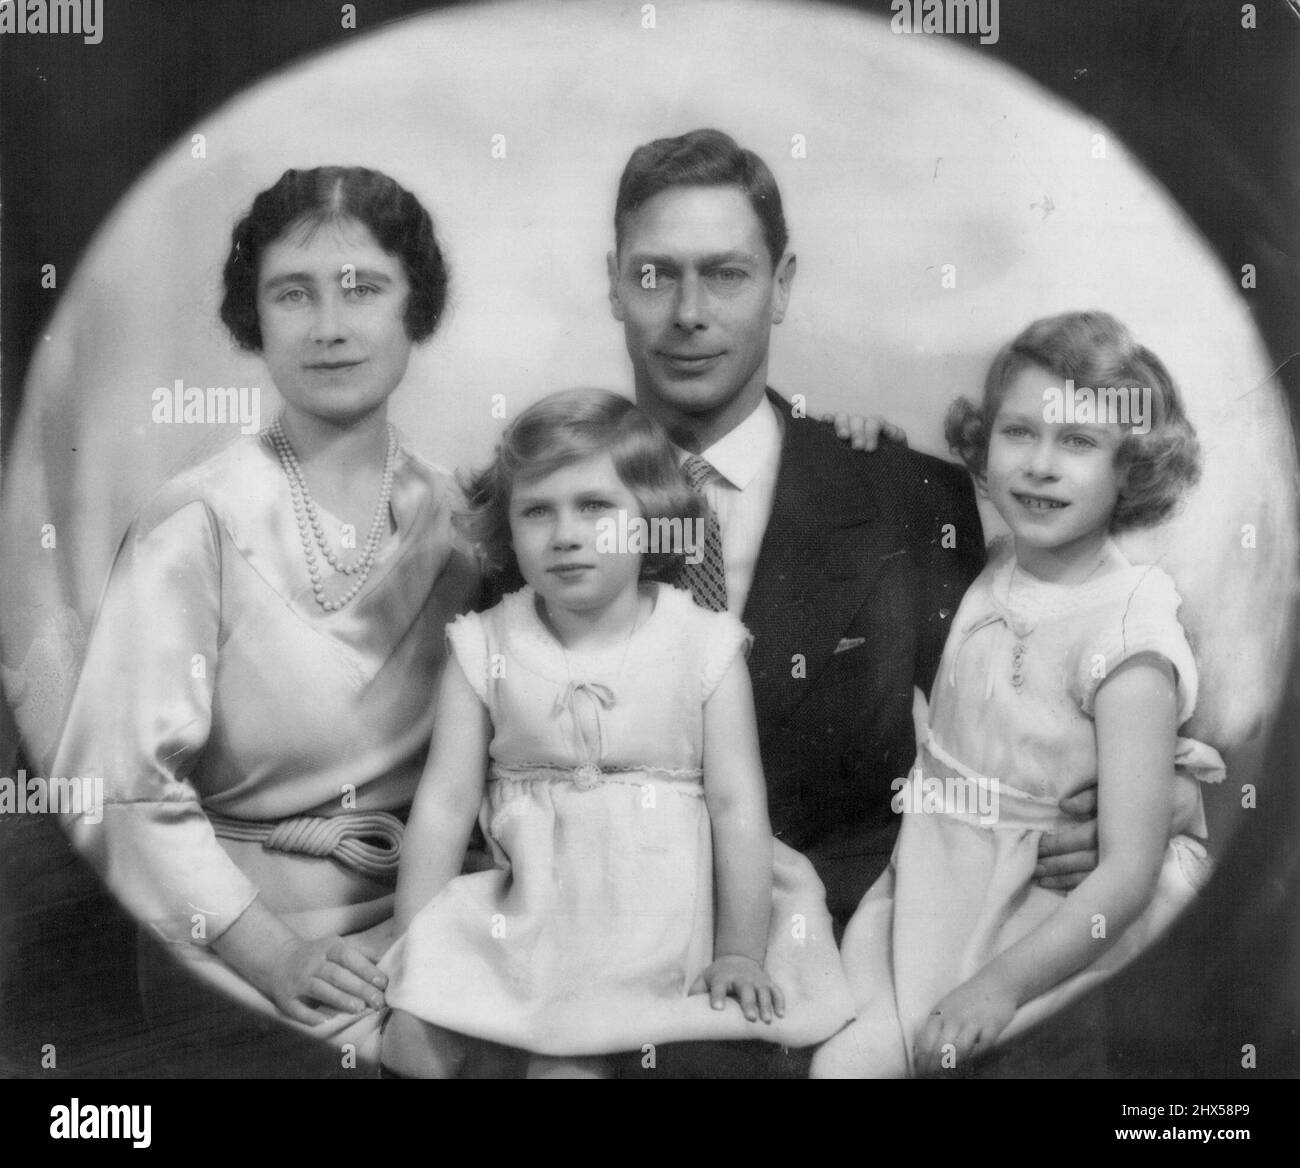 King George & Queen Elizabeth With Princesses Elizabeth & Margaret Rose. January 27, 1936. (Photo by Marcus Adams). Stock Photo